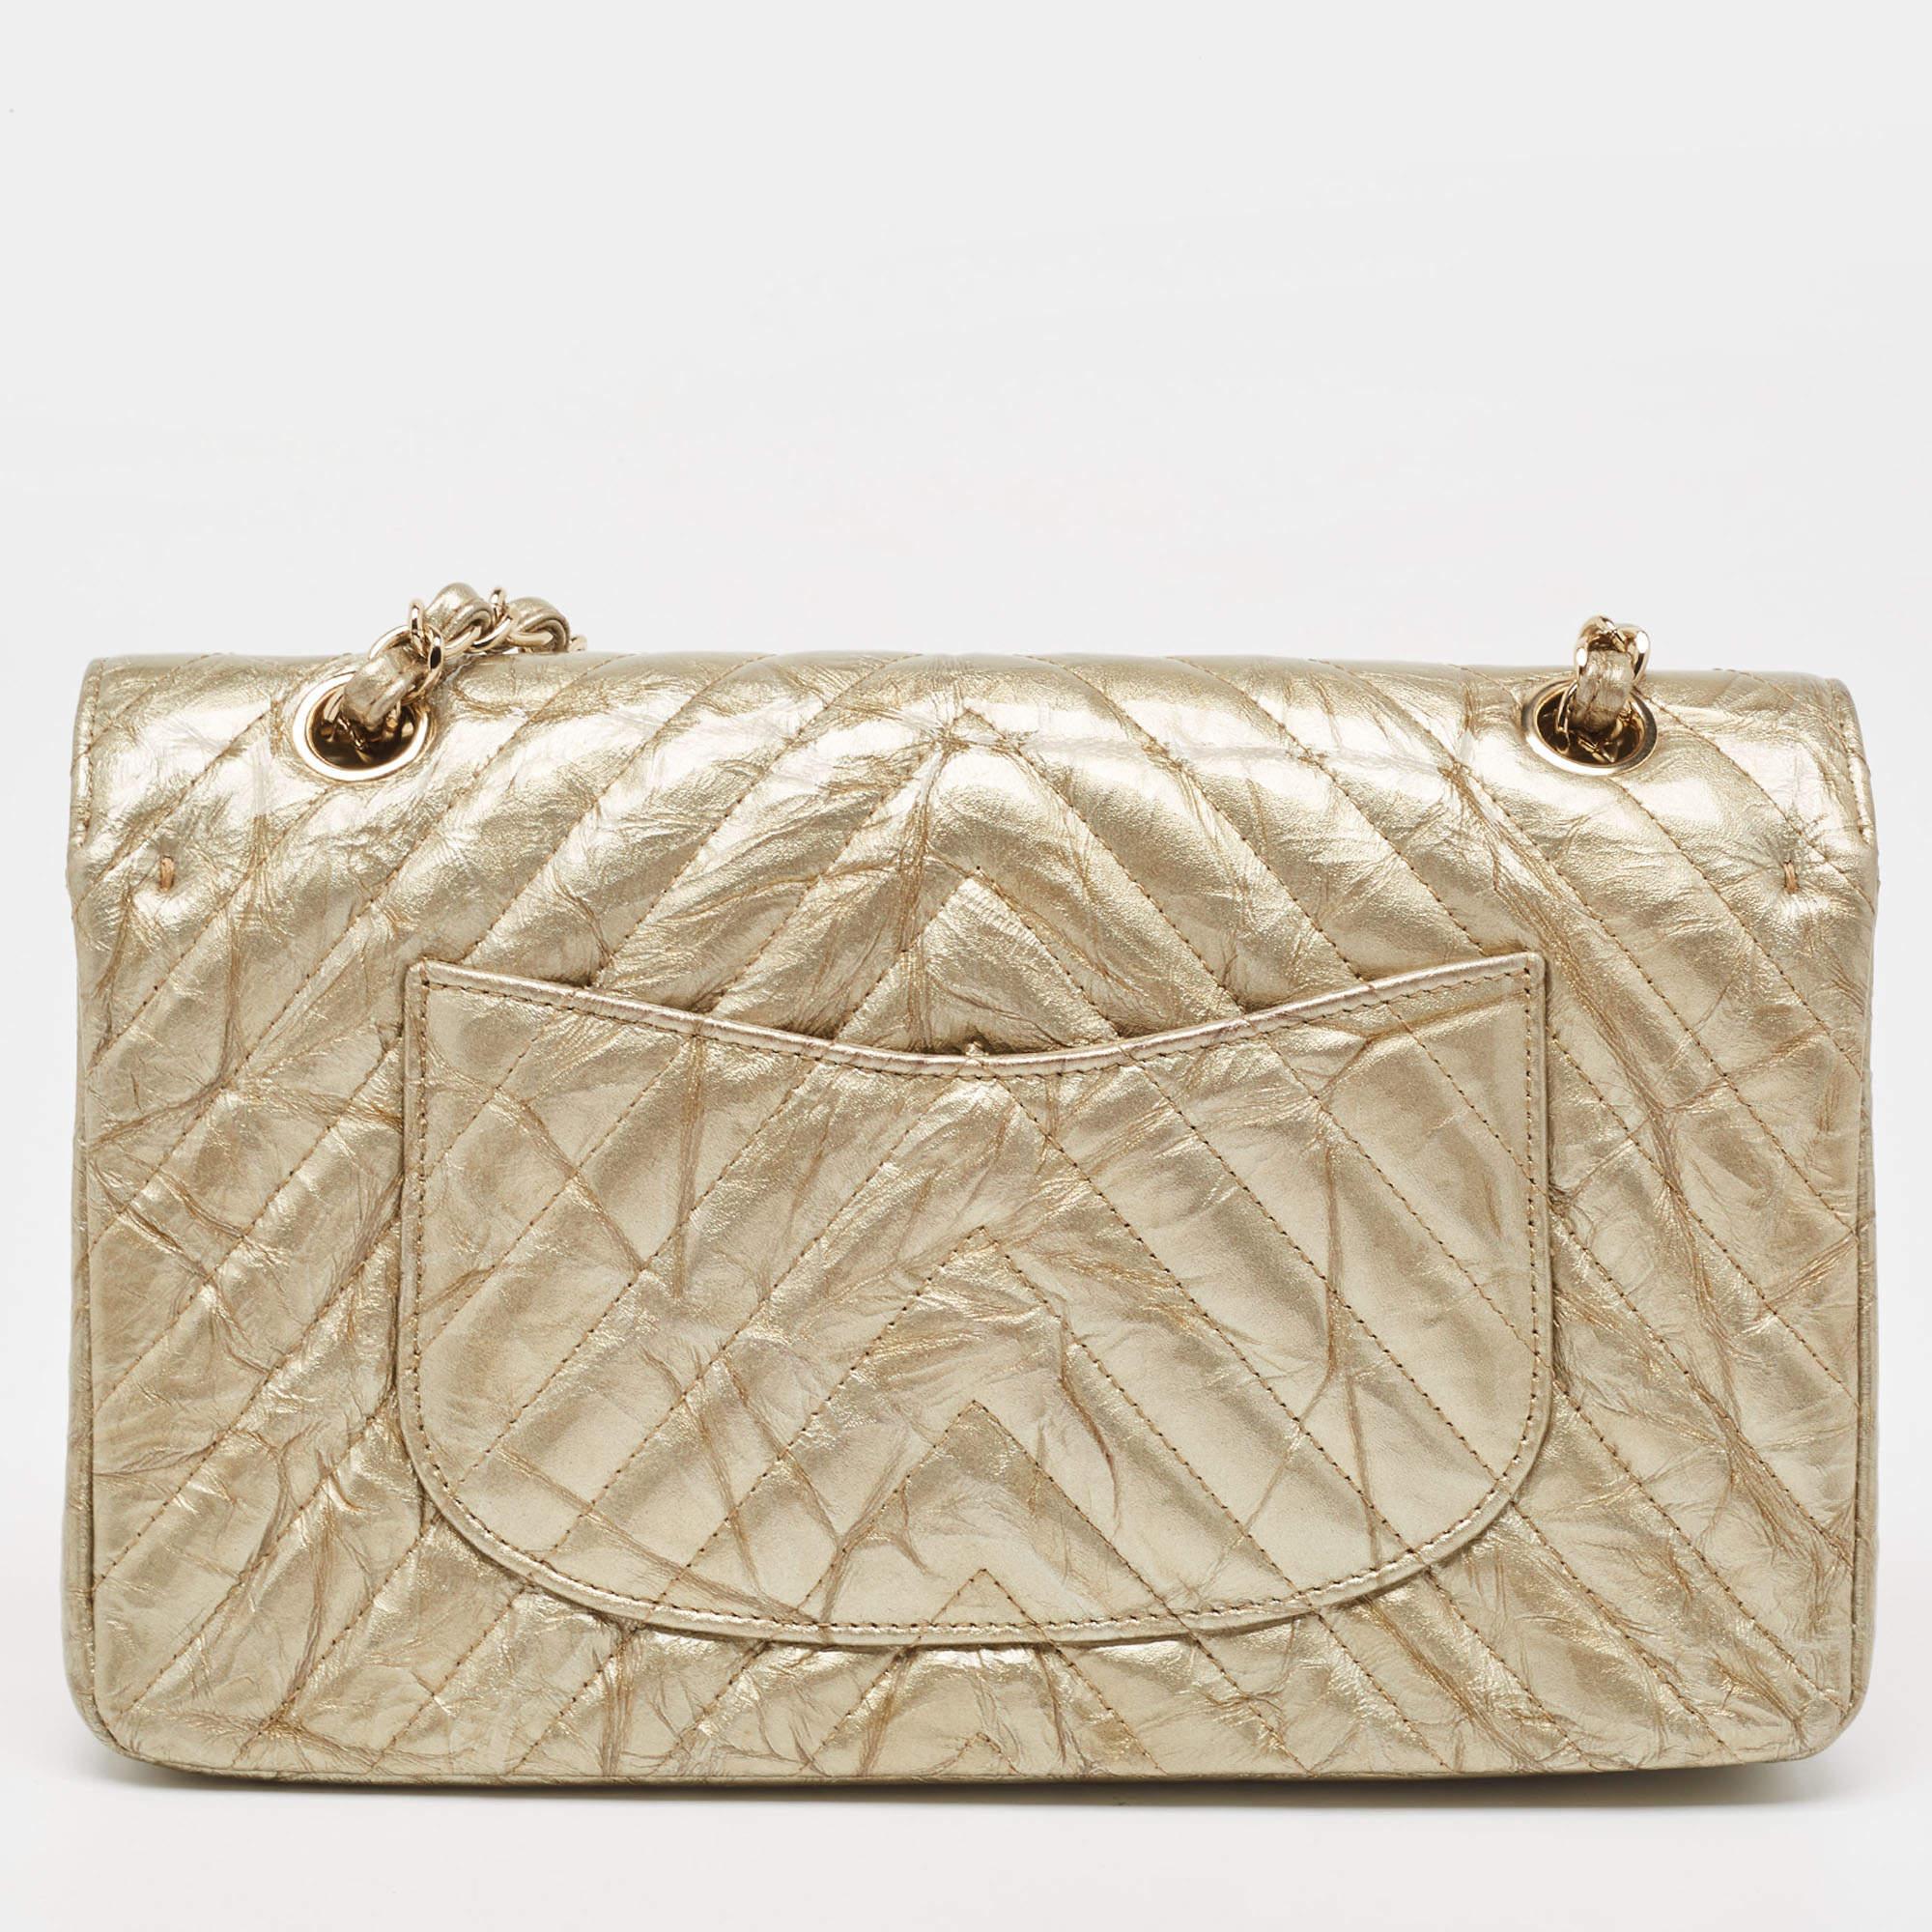 We are in utter awe of this flap bag from Chanel as it is appealing in a surreal way. Exquisitely crafted from caviar patent leather in a chevron design, it bears their signature label on the leather interior and the iconic CC turn-lock on the flap.